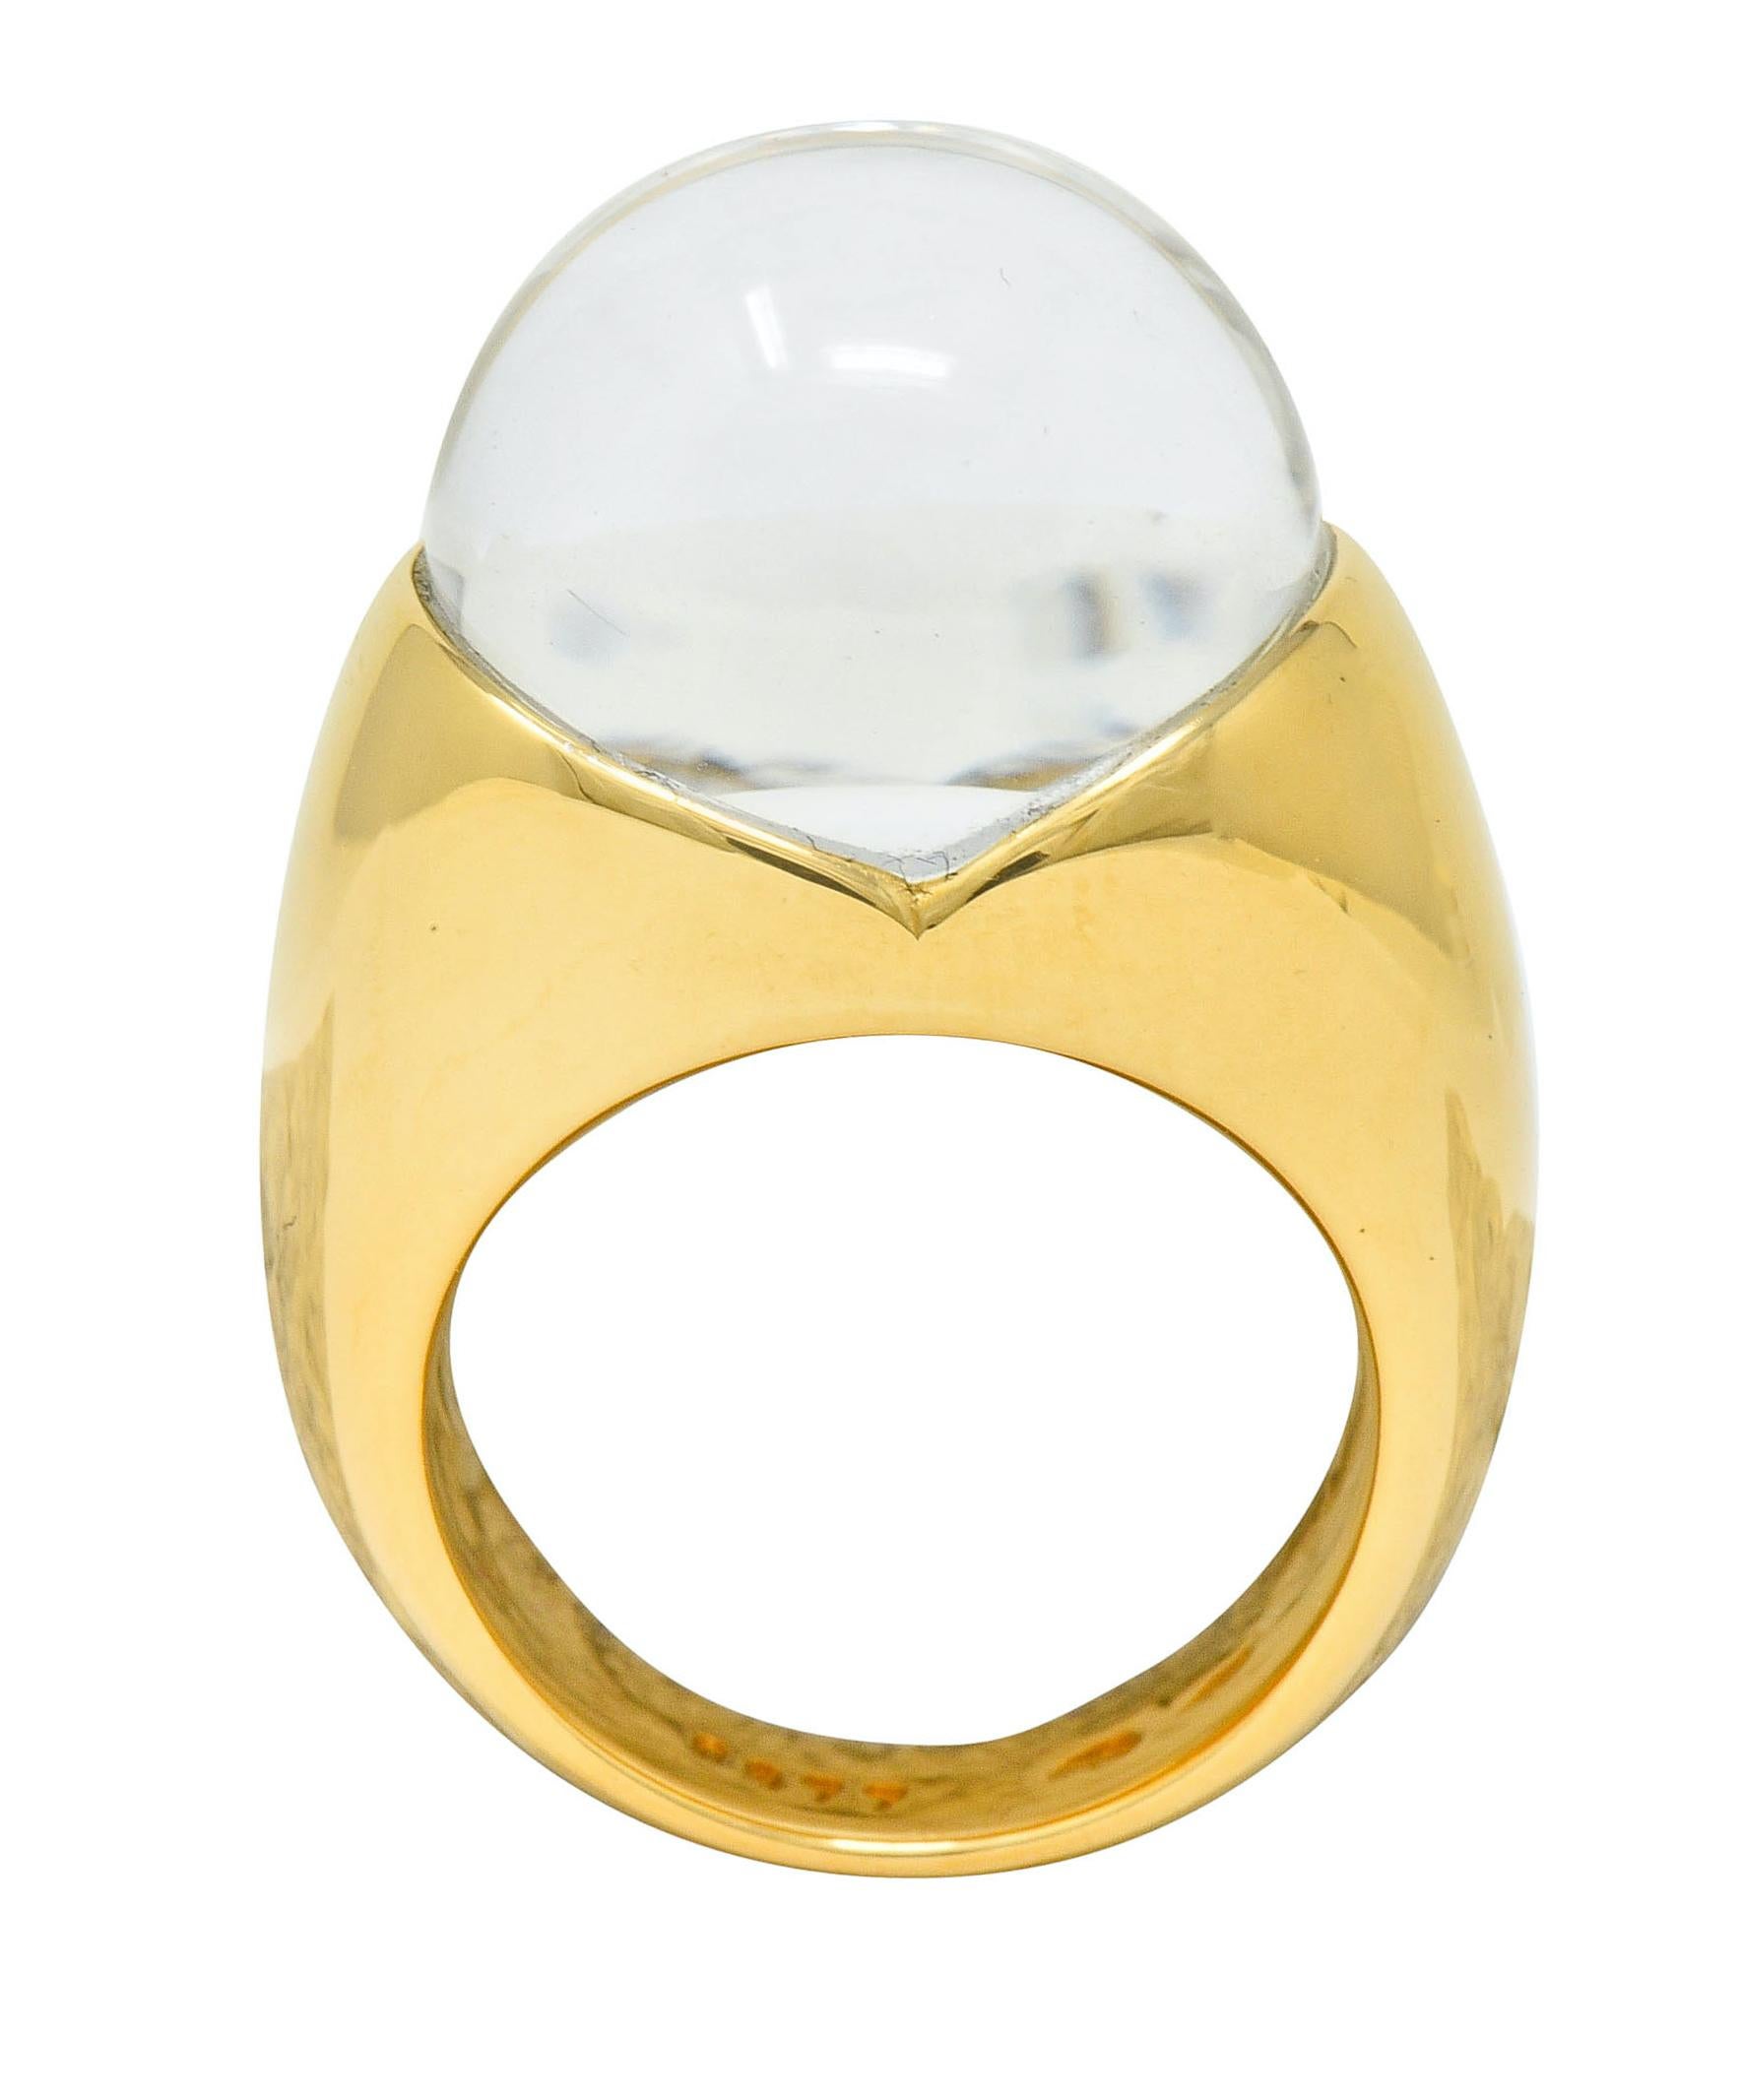 Featuring a rock crystal sphere measuring approximately 15.6 mm, nestled securely in a high polished gold mounting

Crystal ball rests atop a round brilliant cut diamond, its size is magnified through the well polished and transparent rock